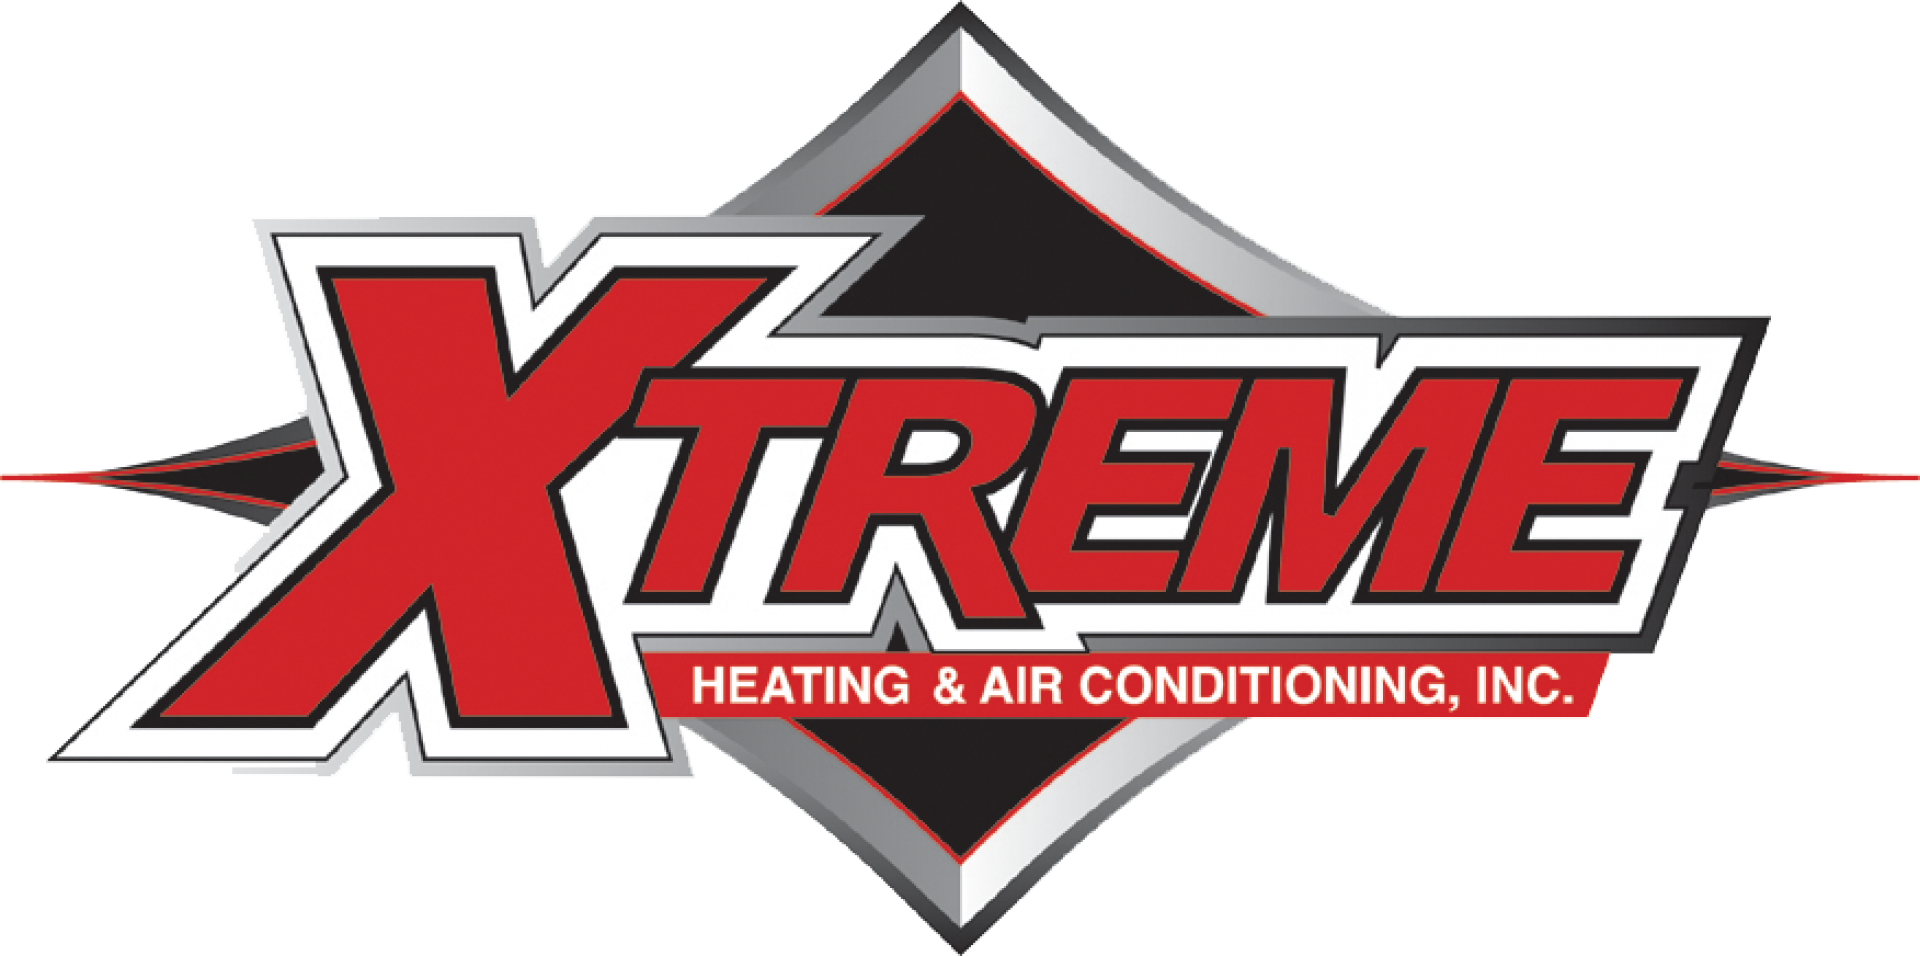 Xtreme Heating And Air Conditioning, Inc. logo